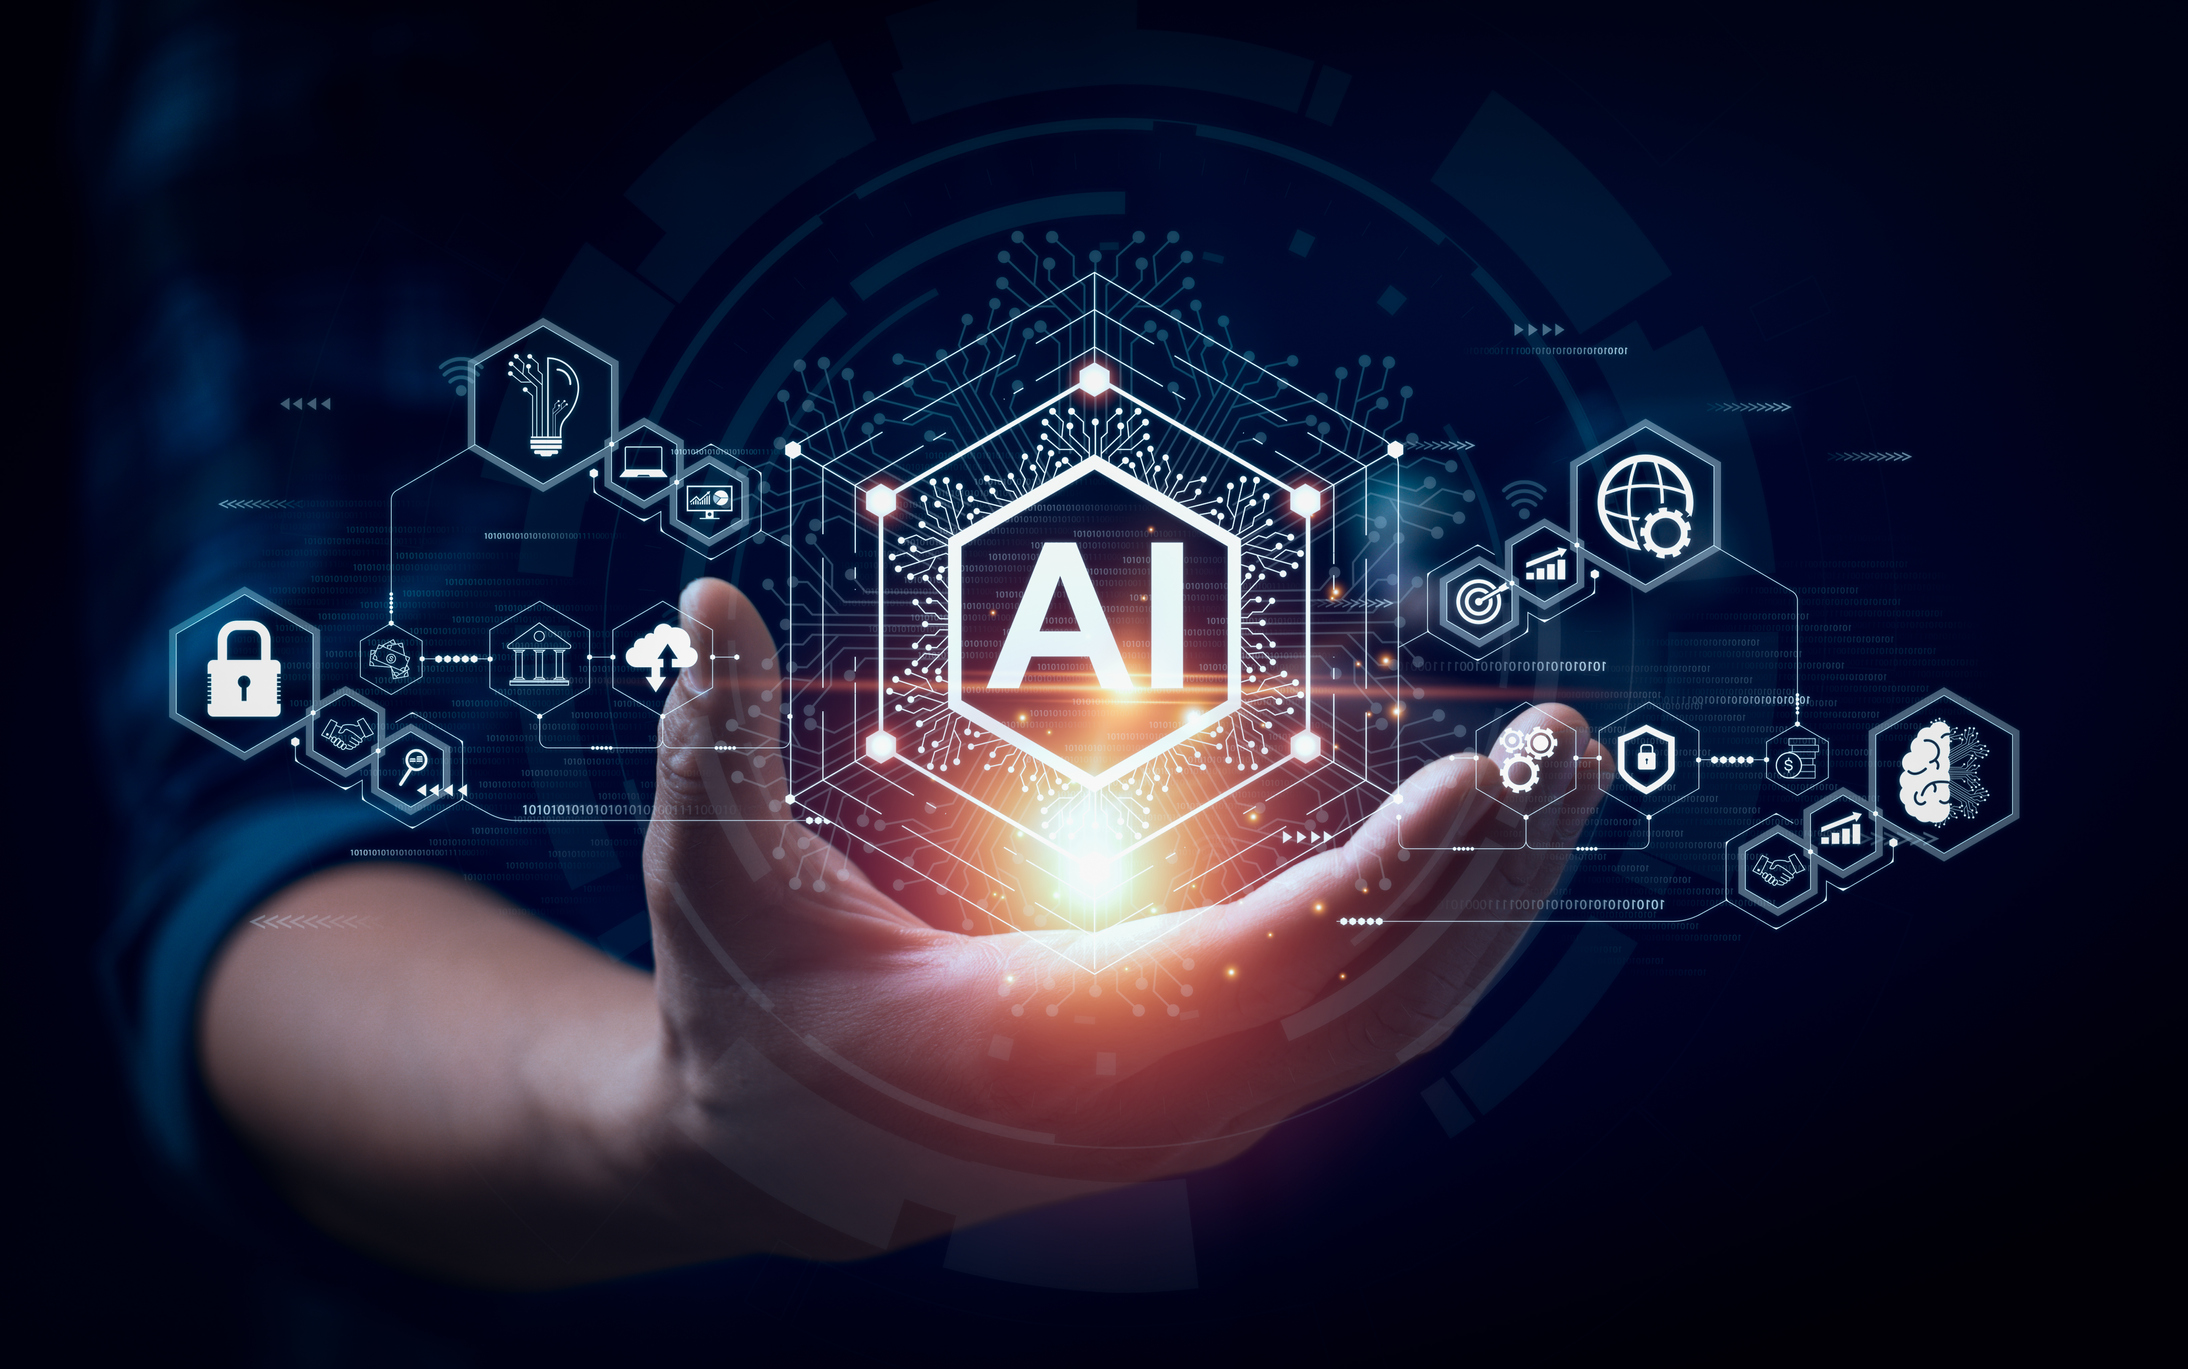 Holding Artificial Intelligence (AI) Automation in your hands